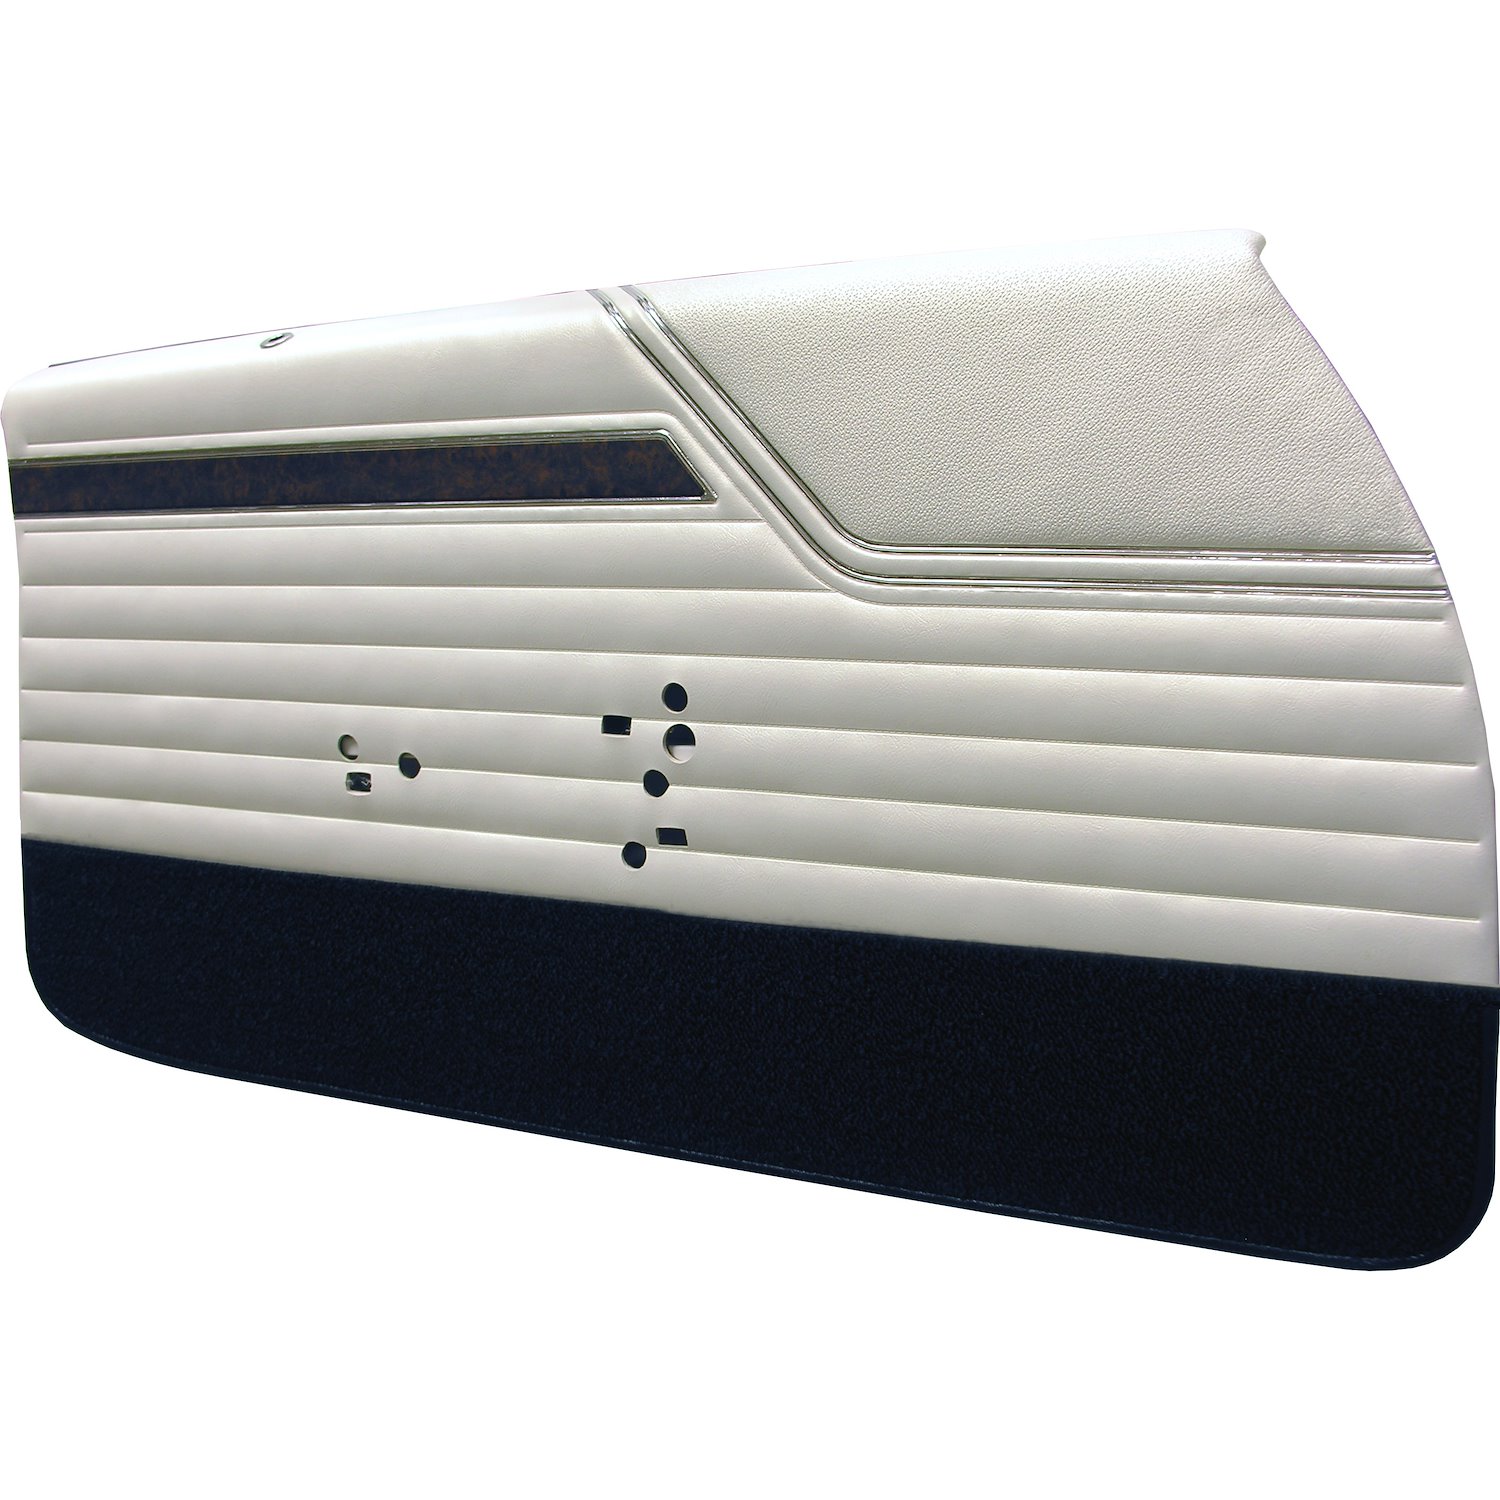 DO70GUS0012202G 70 CUTLASS S/442 HOLIDAY COUPE DOOR PANELS - PEARL WHITE